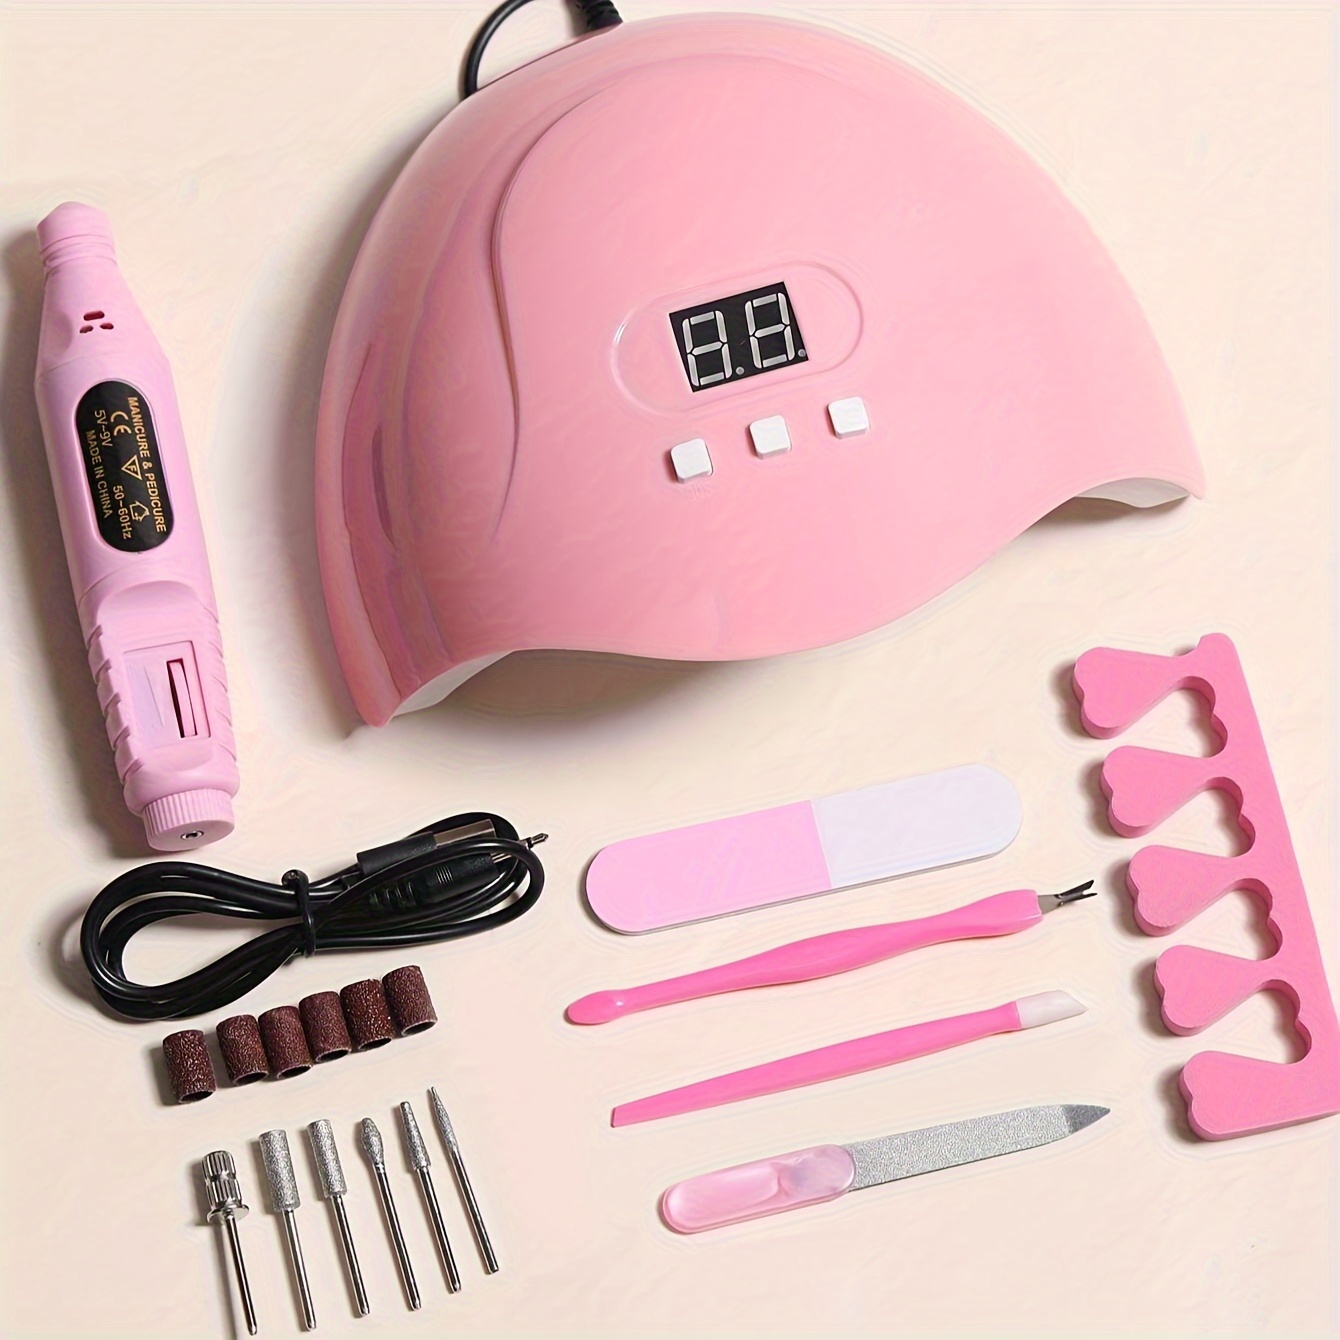 

Nail Art Kit, Gel Polish Glue Drying Machine, Polisher, Dead Skin Remover, File, Divider, And Manicure Pedicure Tools